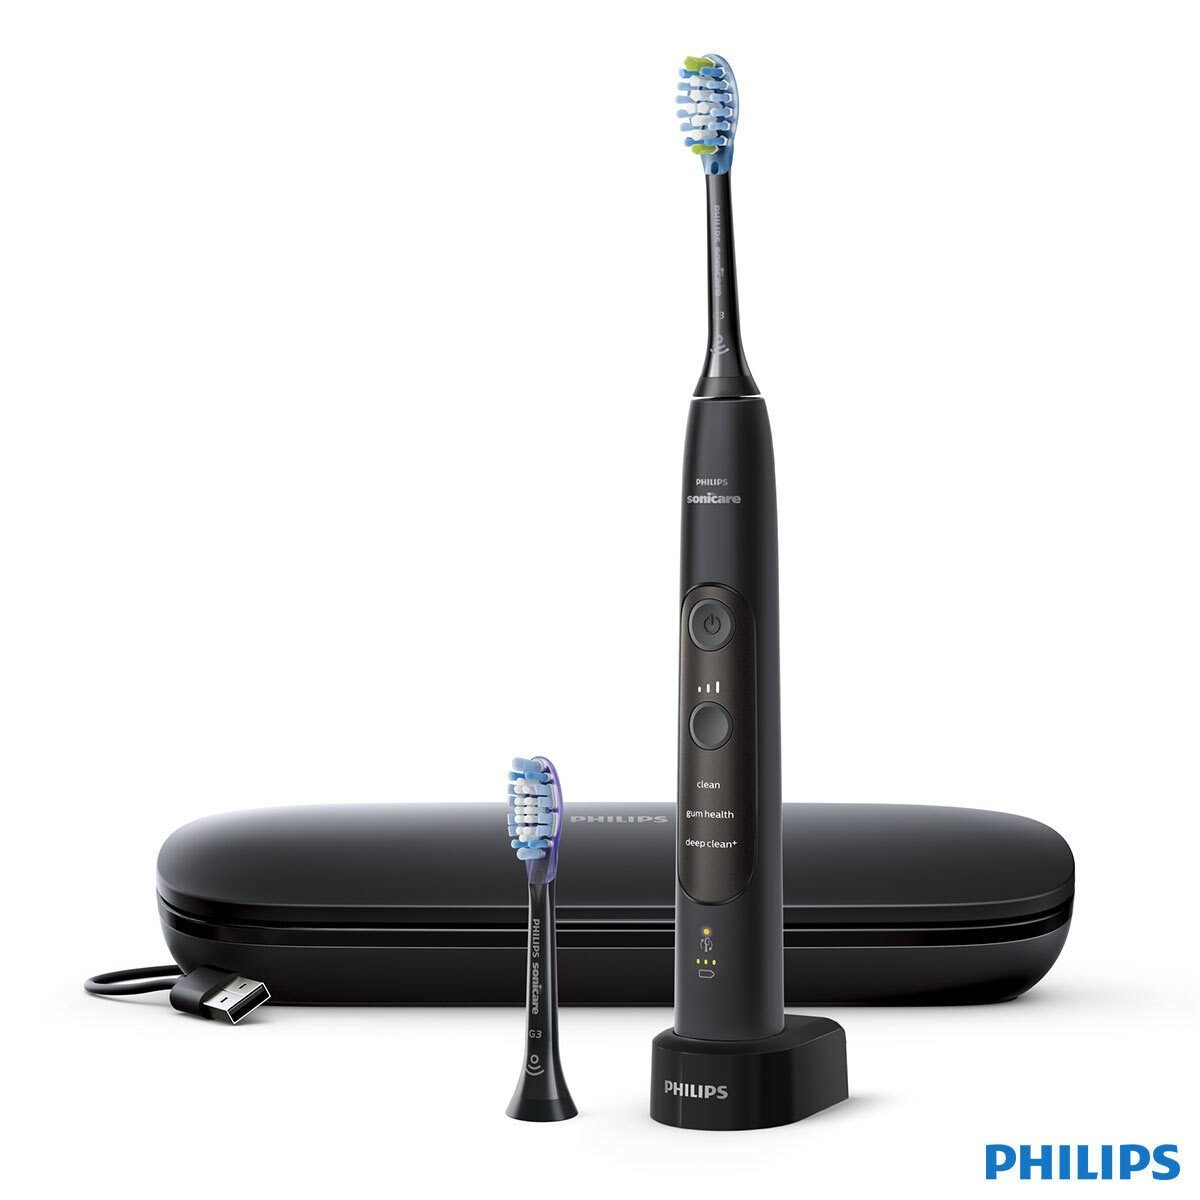 Philips Sonicare ExpertClean 7300 Toothbrush Black, HX9611/22 Philips Sonicare ExpertClean 7300 Toothbrush Black, HX9611/22 - Signature Retail Stores